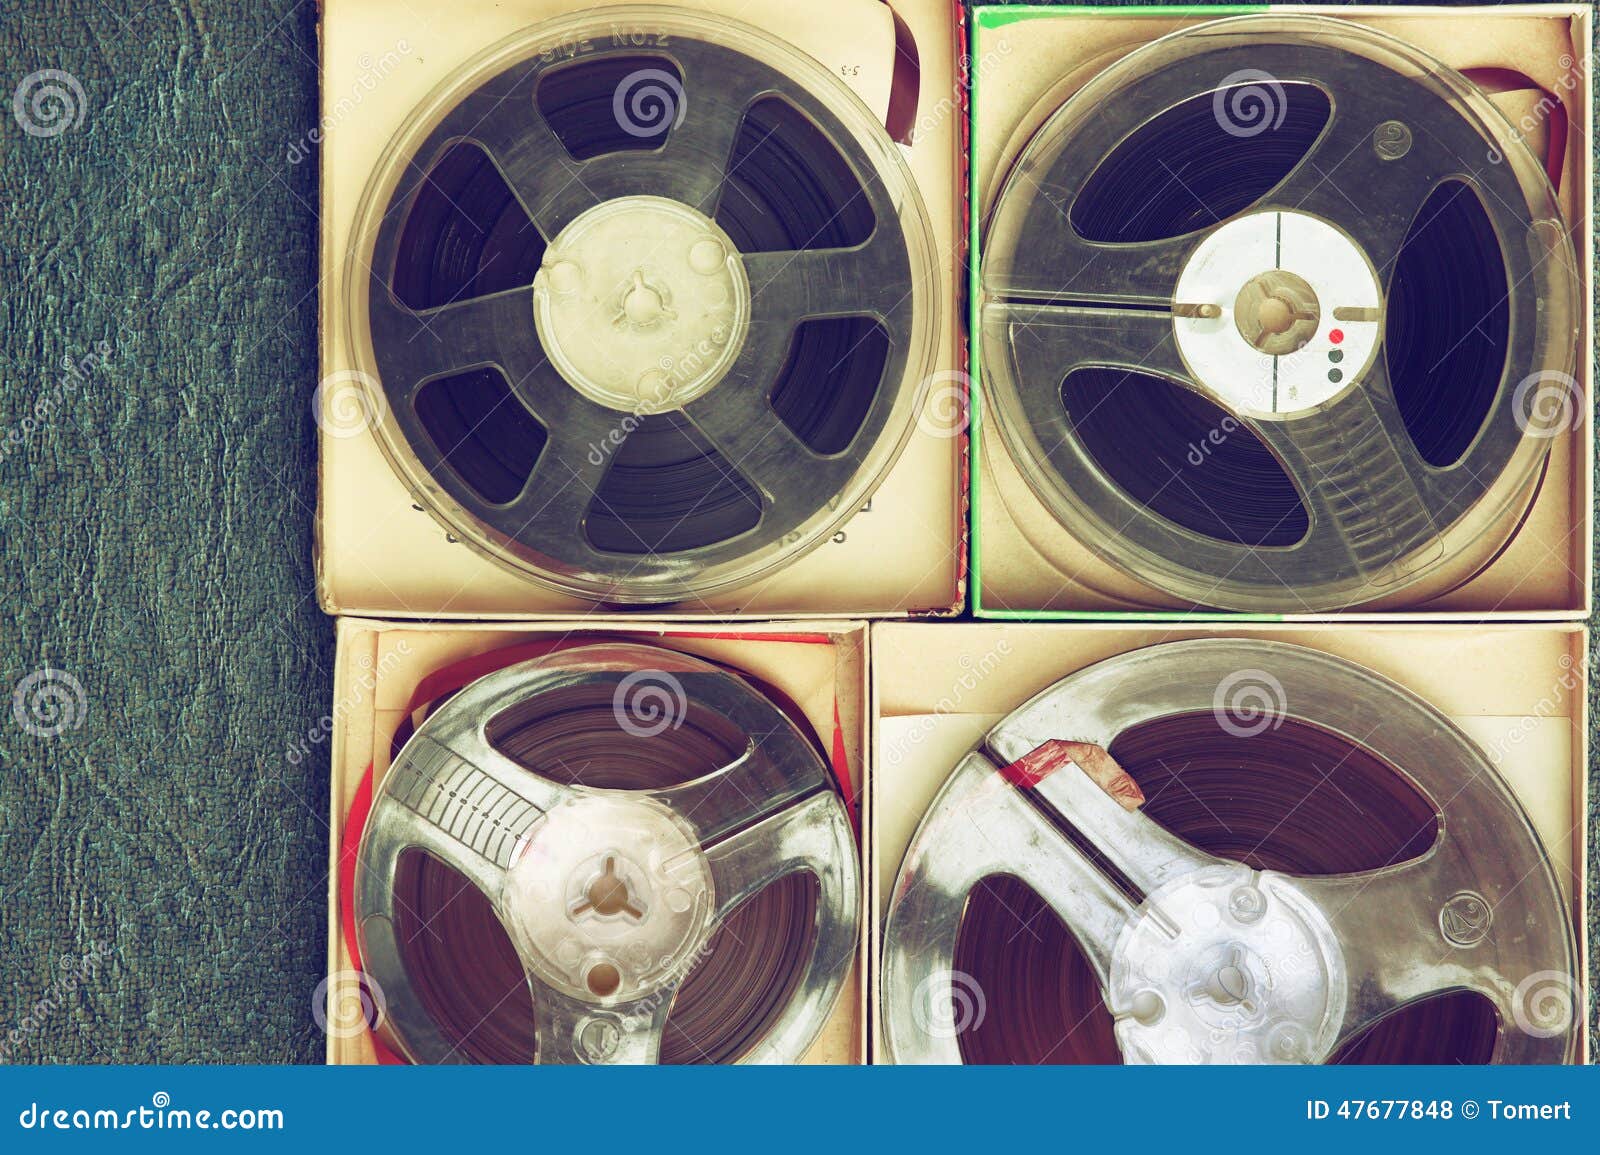 Top View of Old Sound Recording Tape, Reel To Reel Type and Box